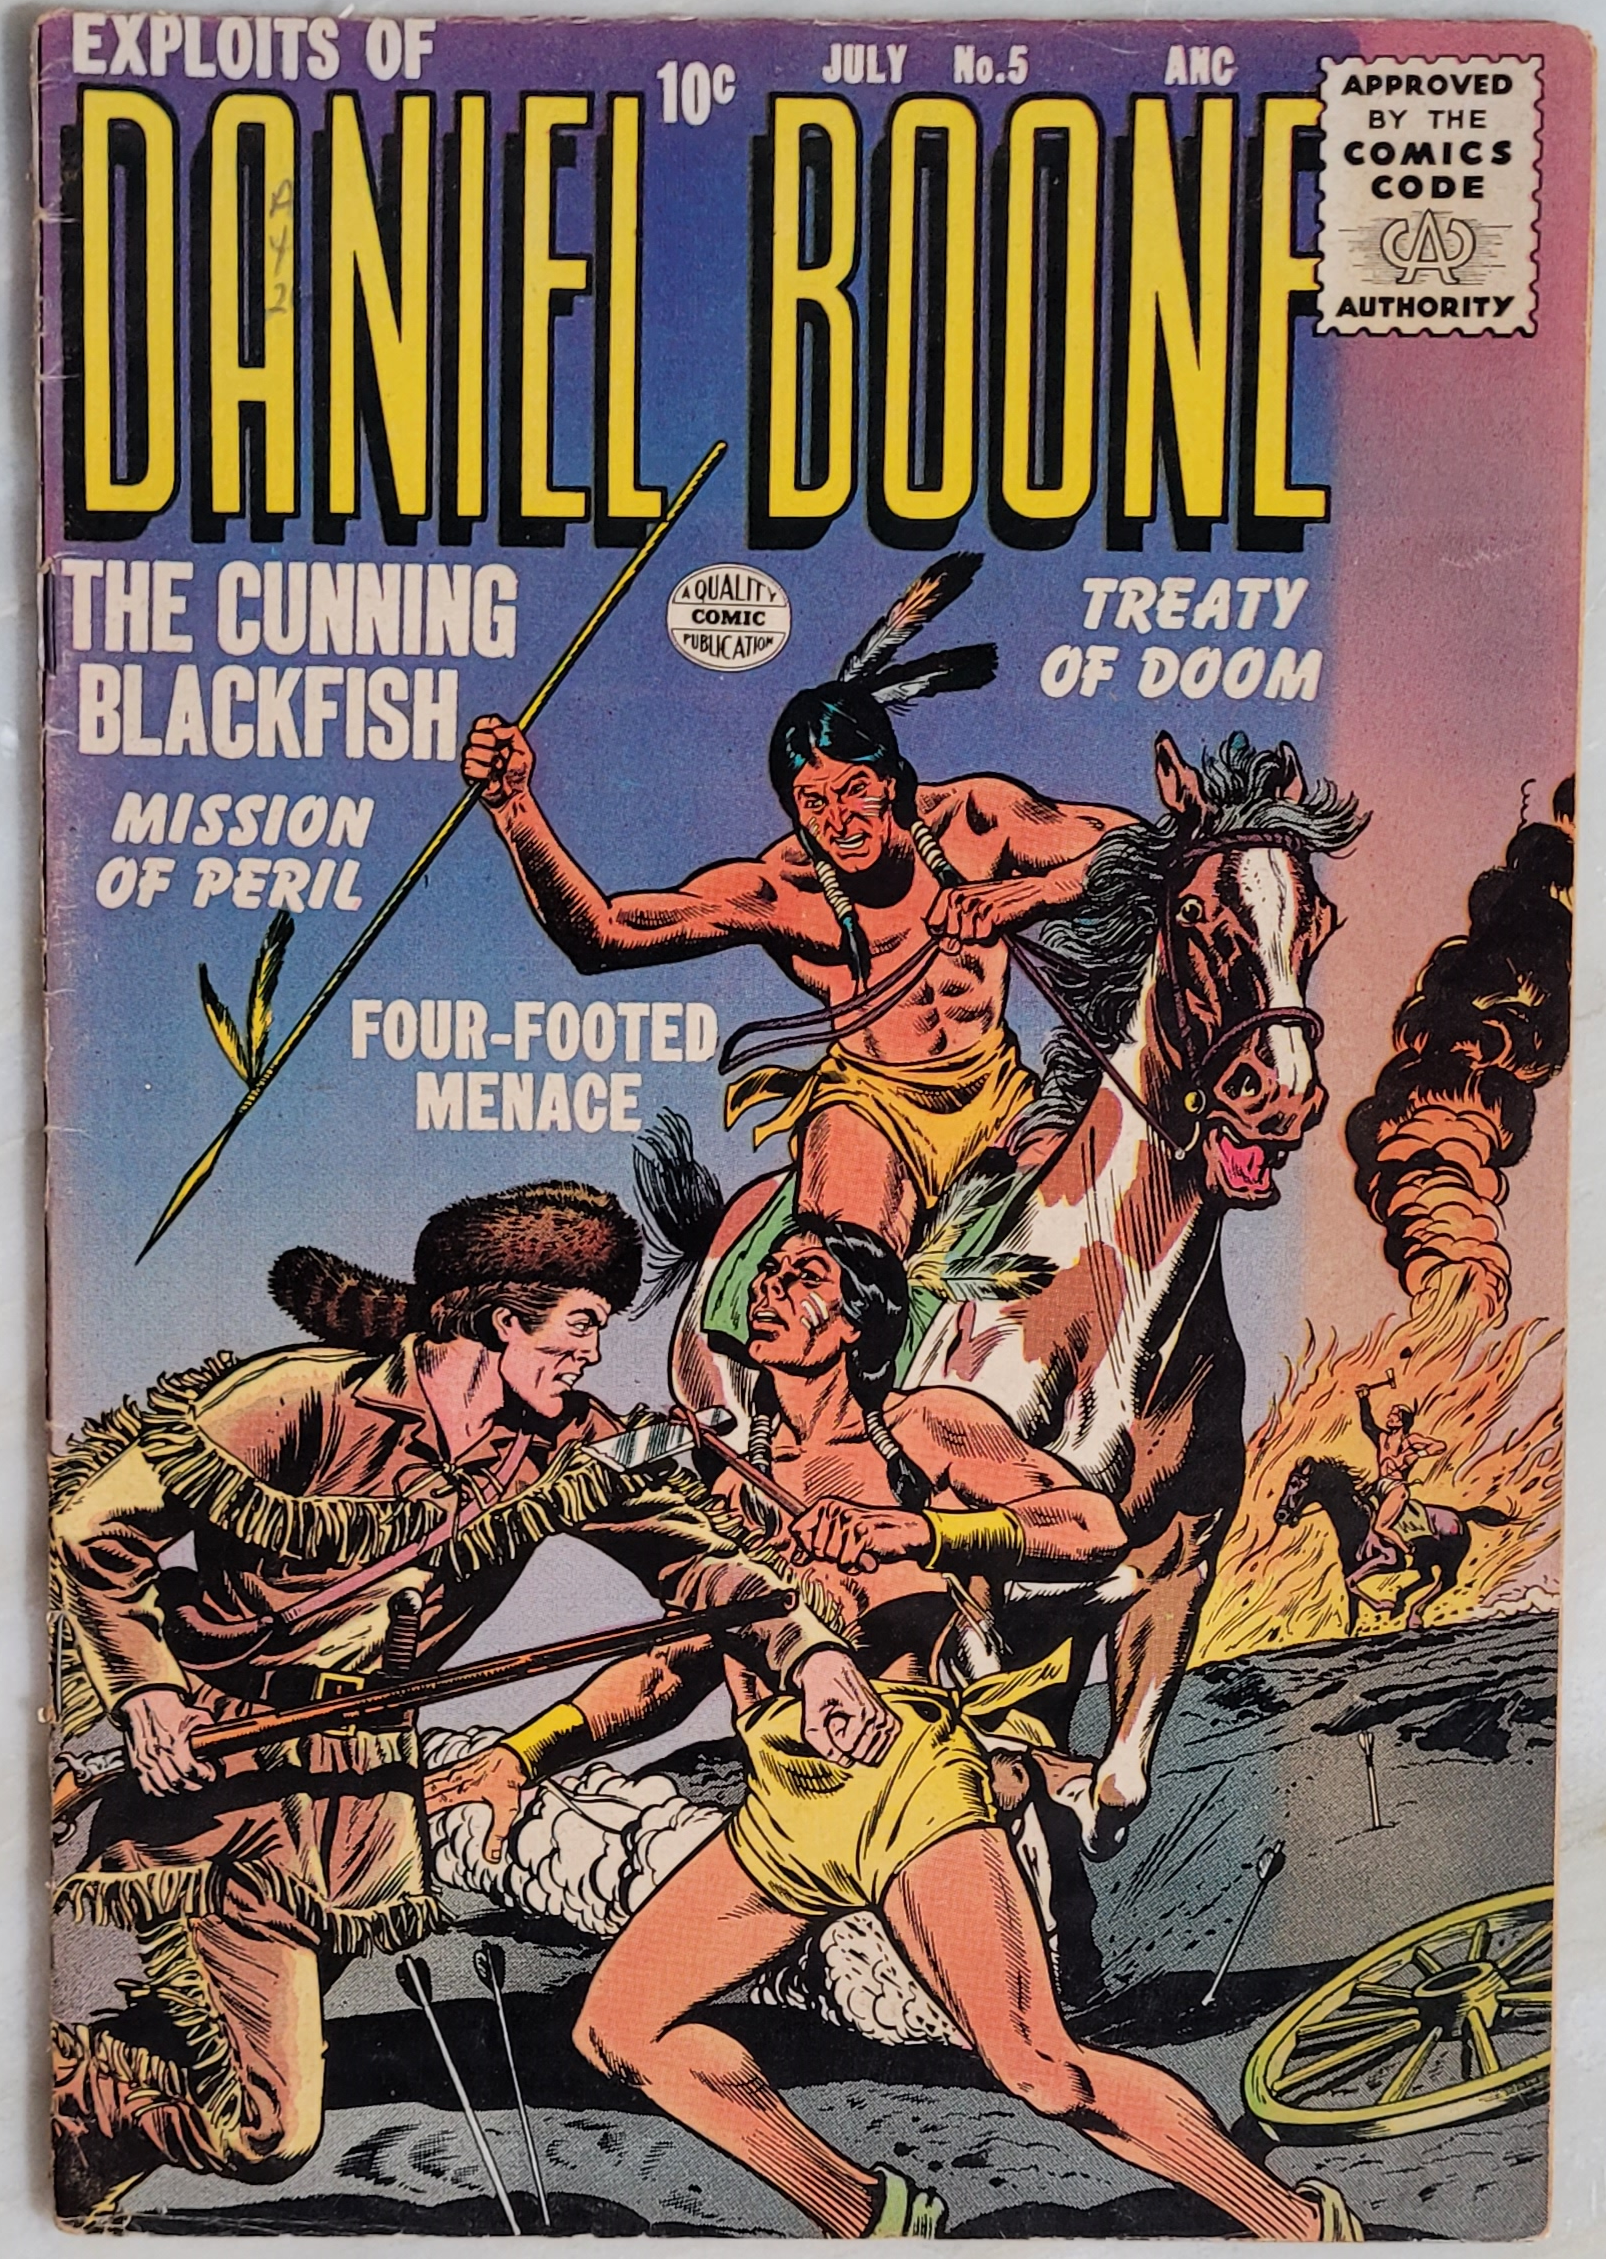 Exploits of Daniel Boone #5 - Front Cover